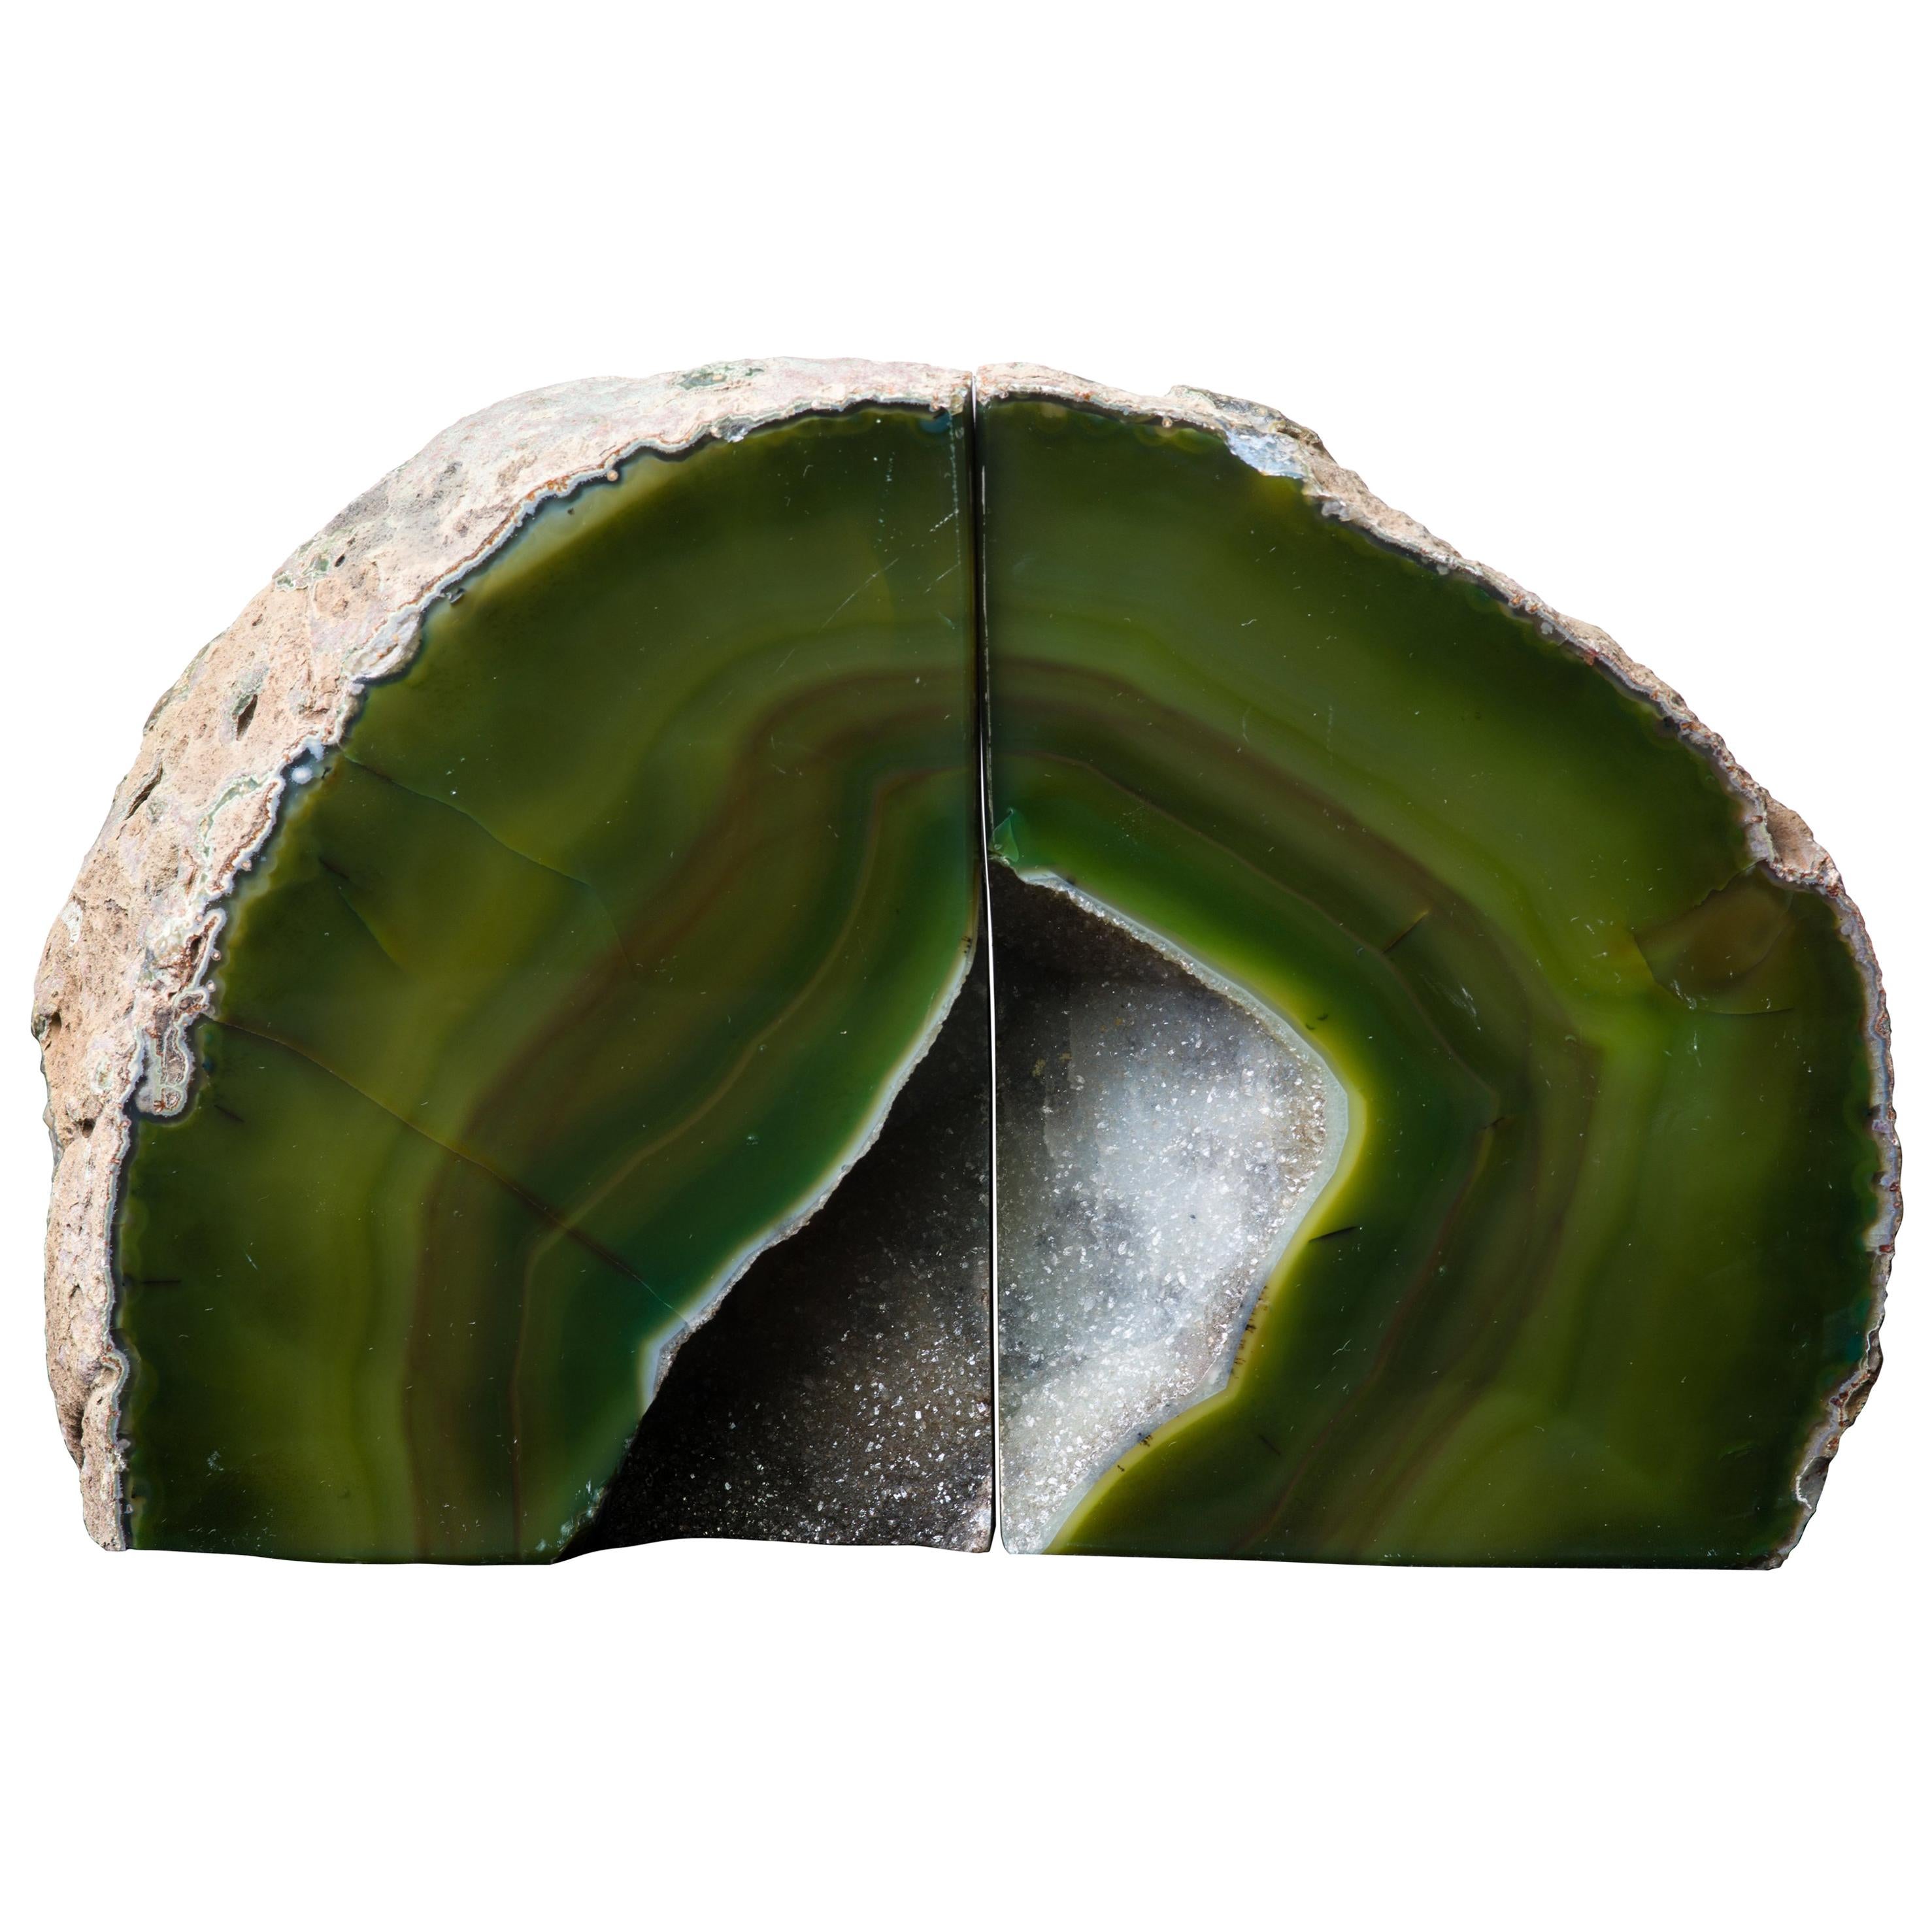 Pair of Organic Modern Agate and Crystal Bookends in Moss Green